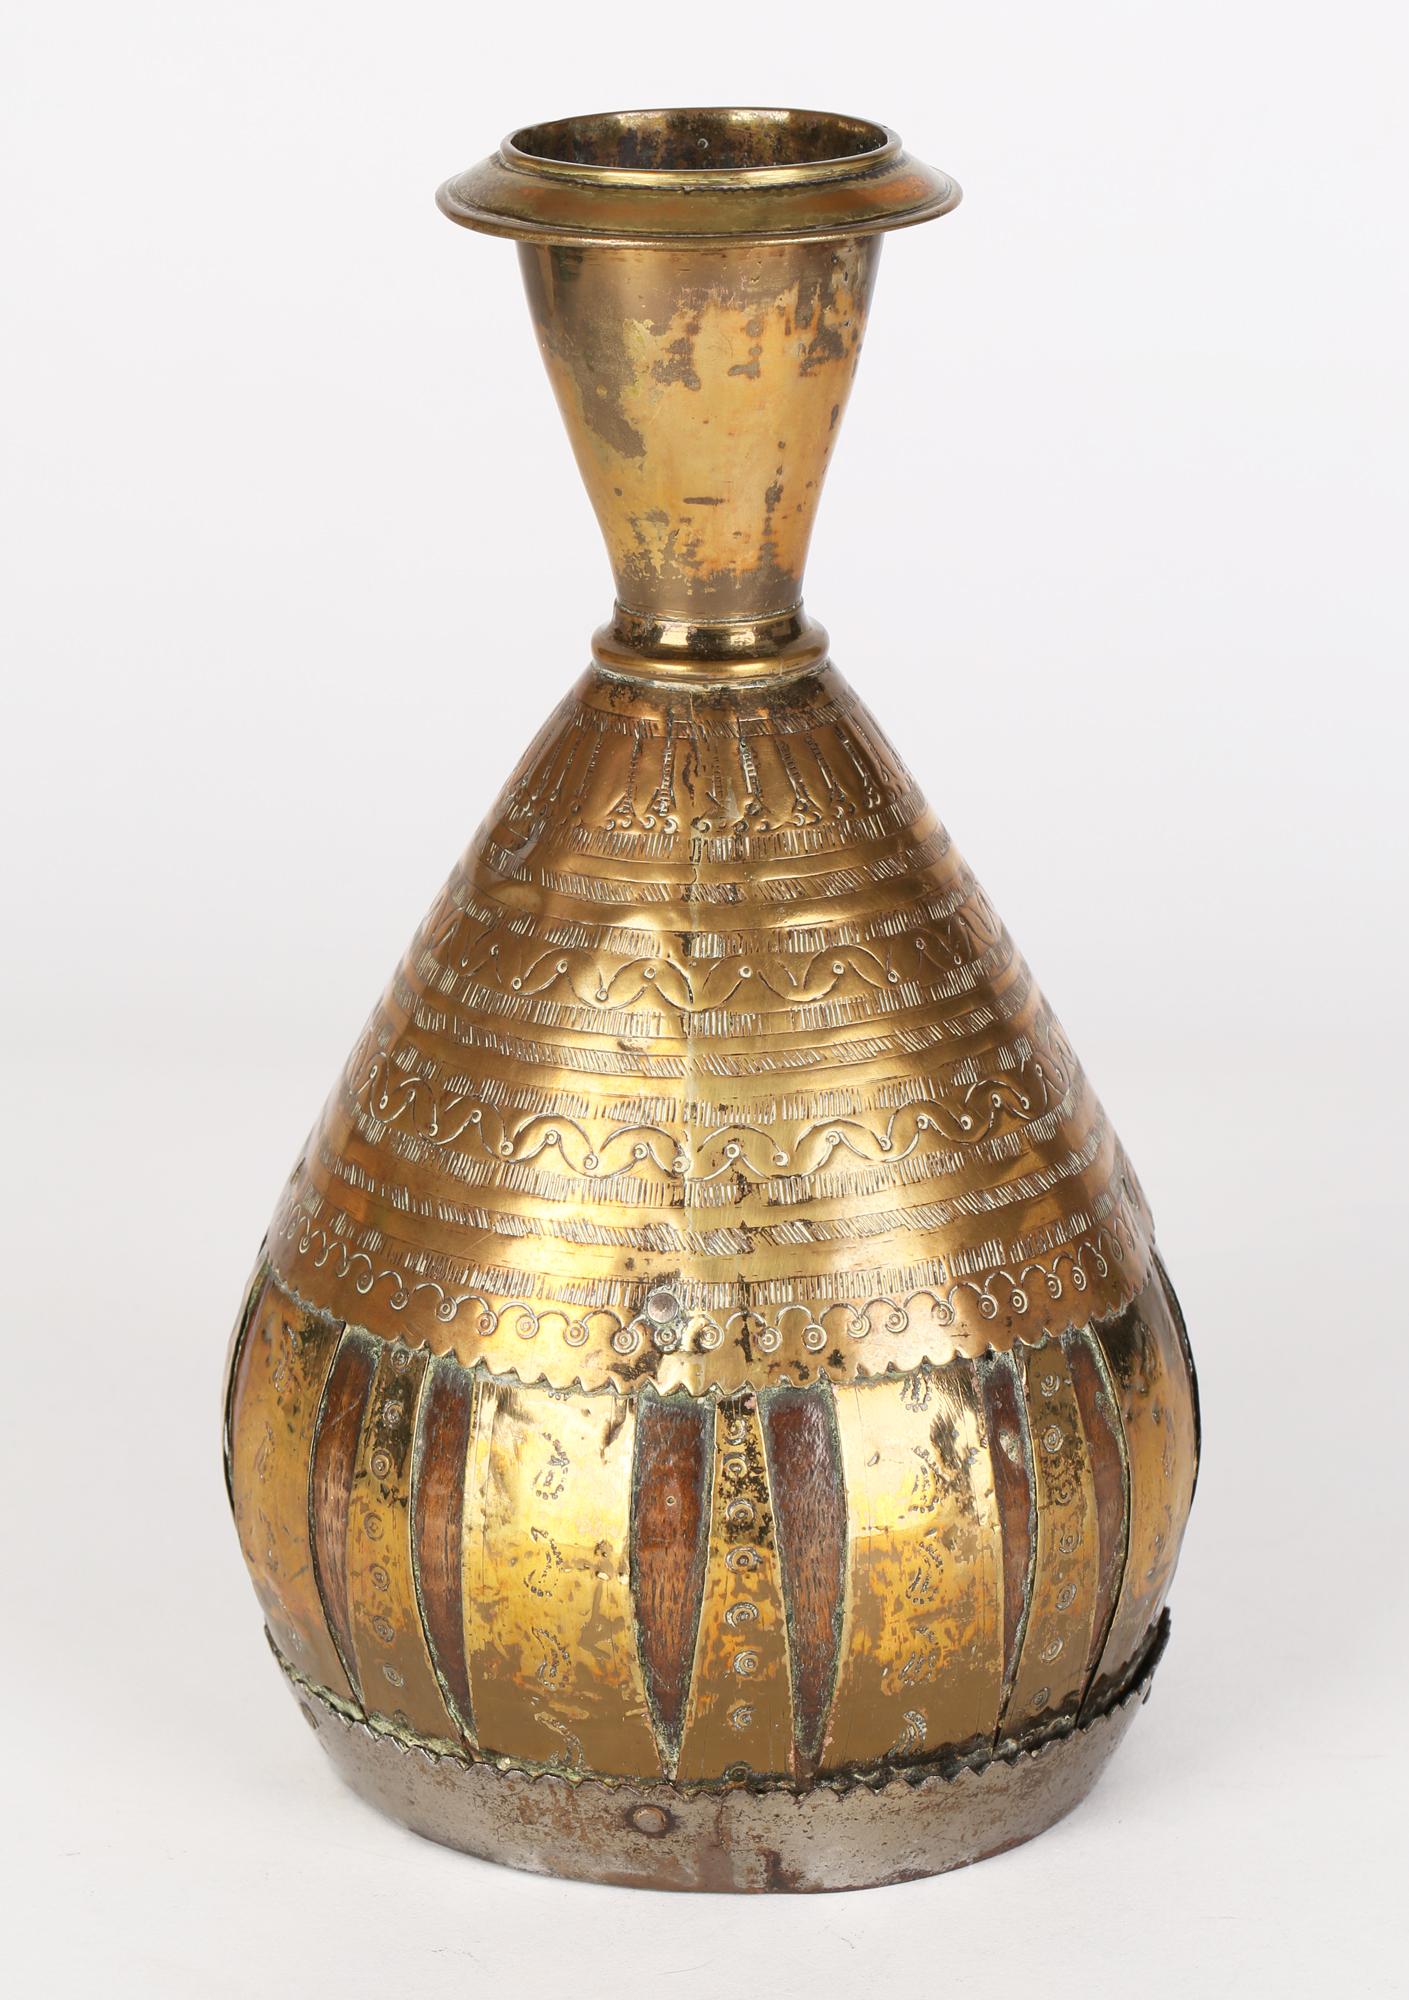 A stytlish antique Indian or Middle Eastern coconut vase overlaid and mounted with brass dating from the 19th century. The vase has a coconut body with an inset turned wood base and is mounted with a brass upper body applied with incised patterning,